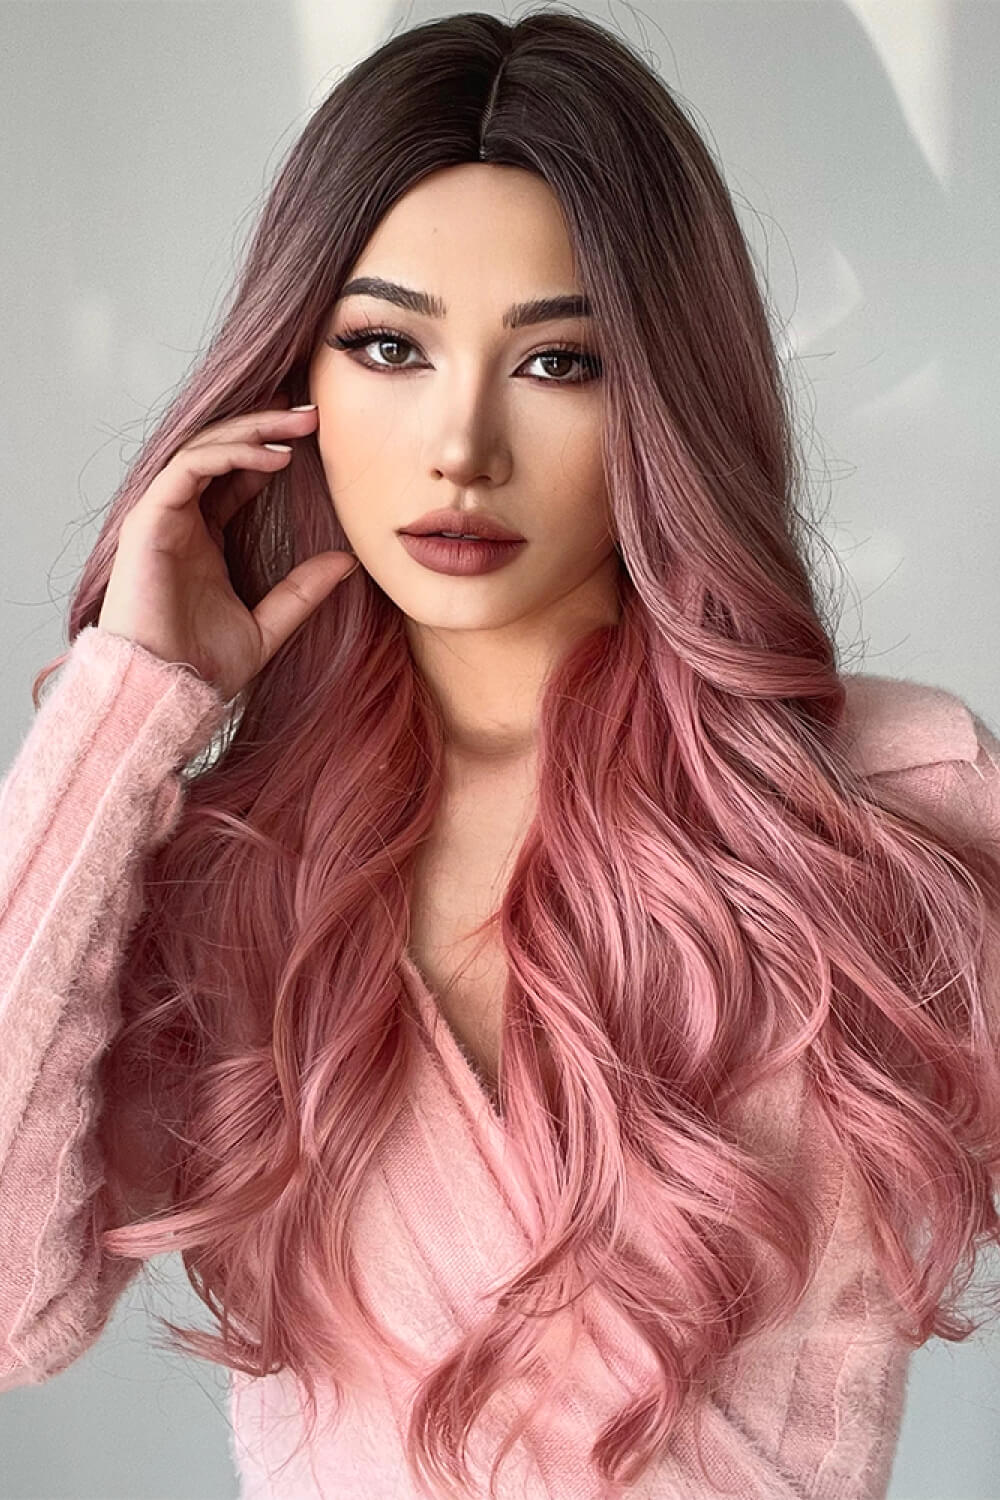 Fashion Wave Synthetic Long Wigs in Pink 26''